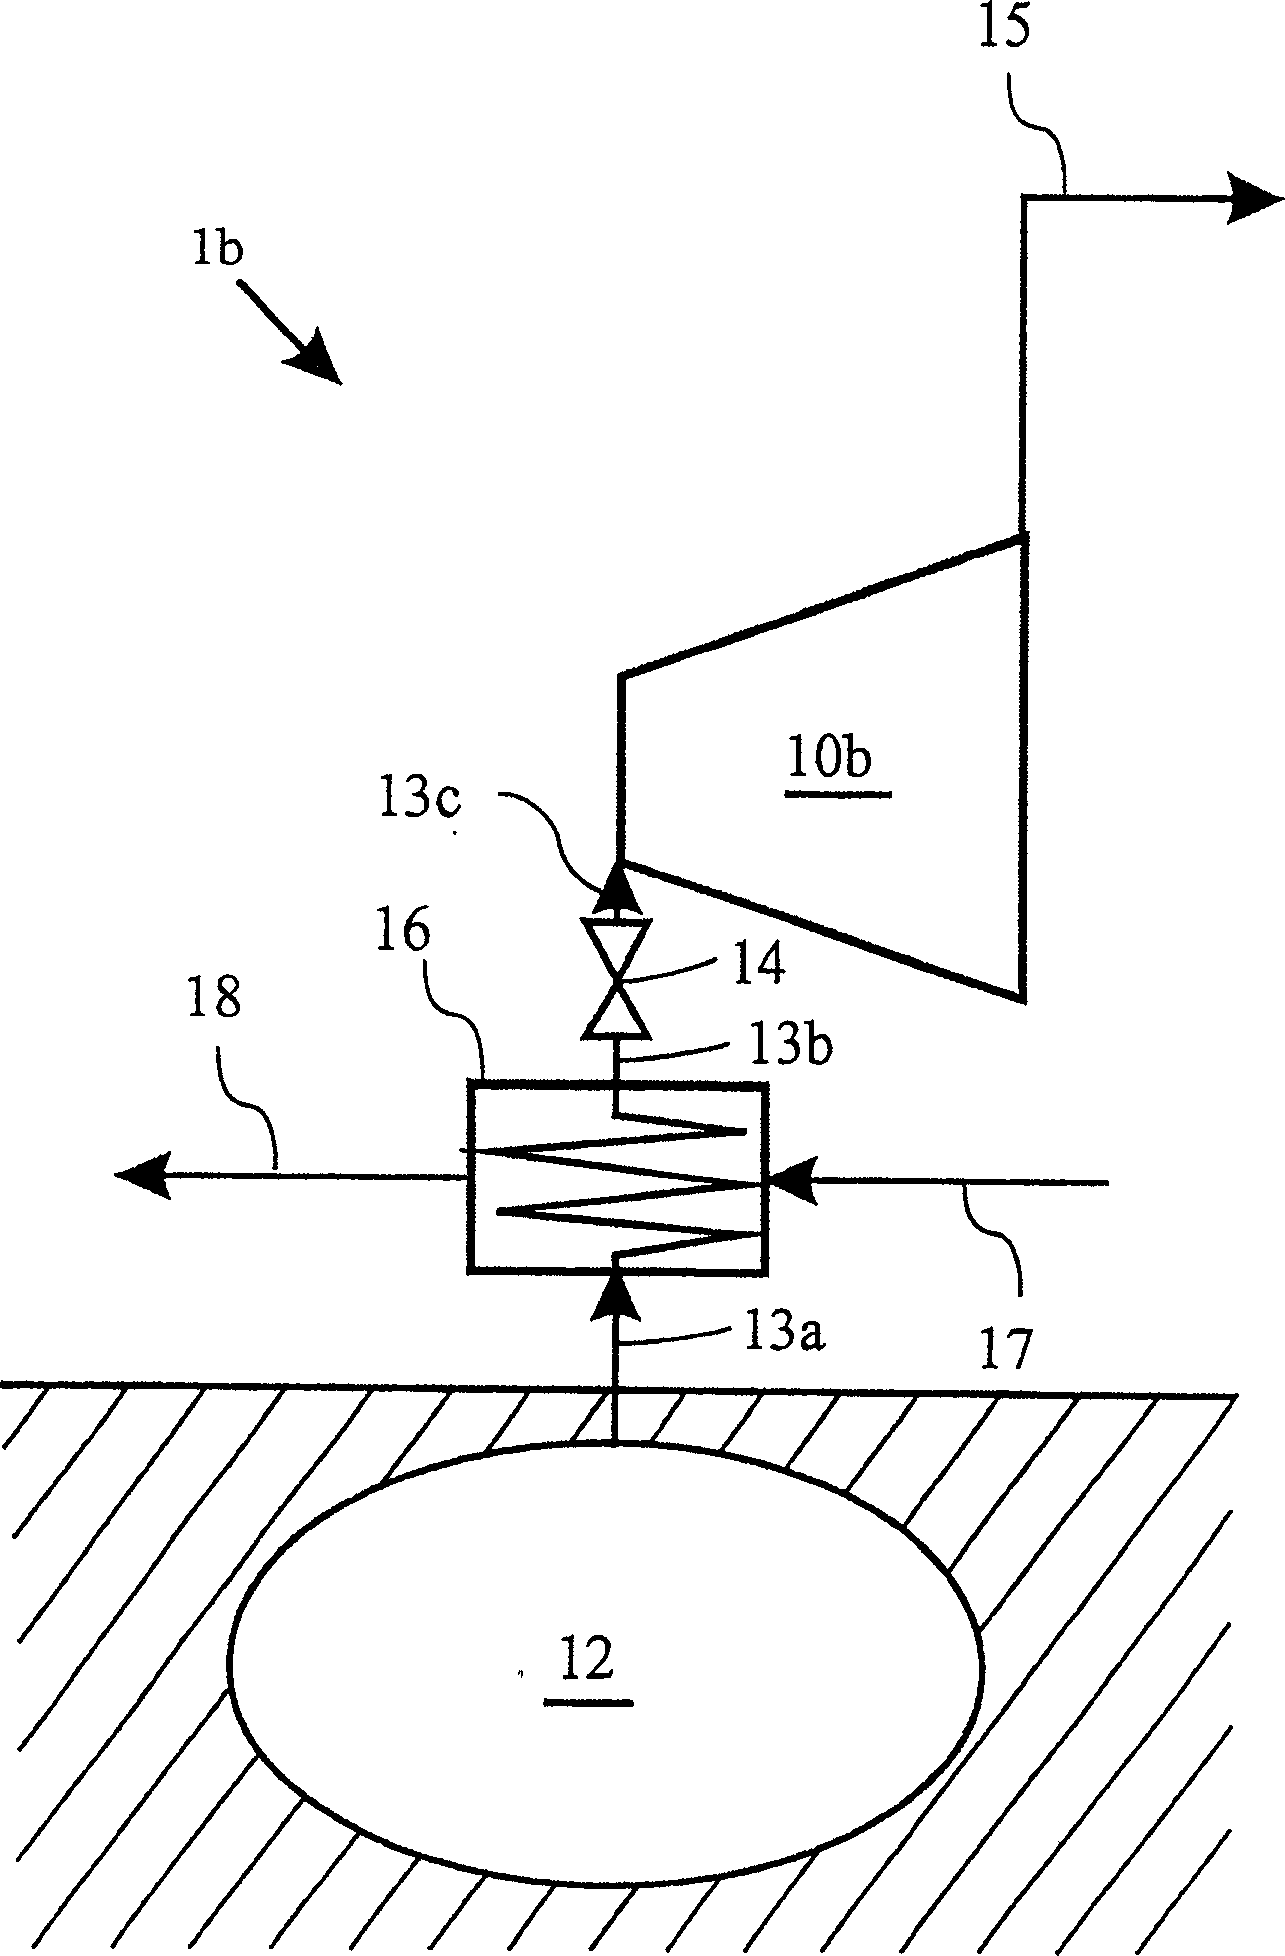 Generator system and method for operating such a system